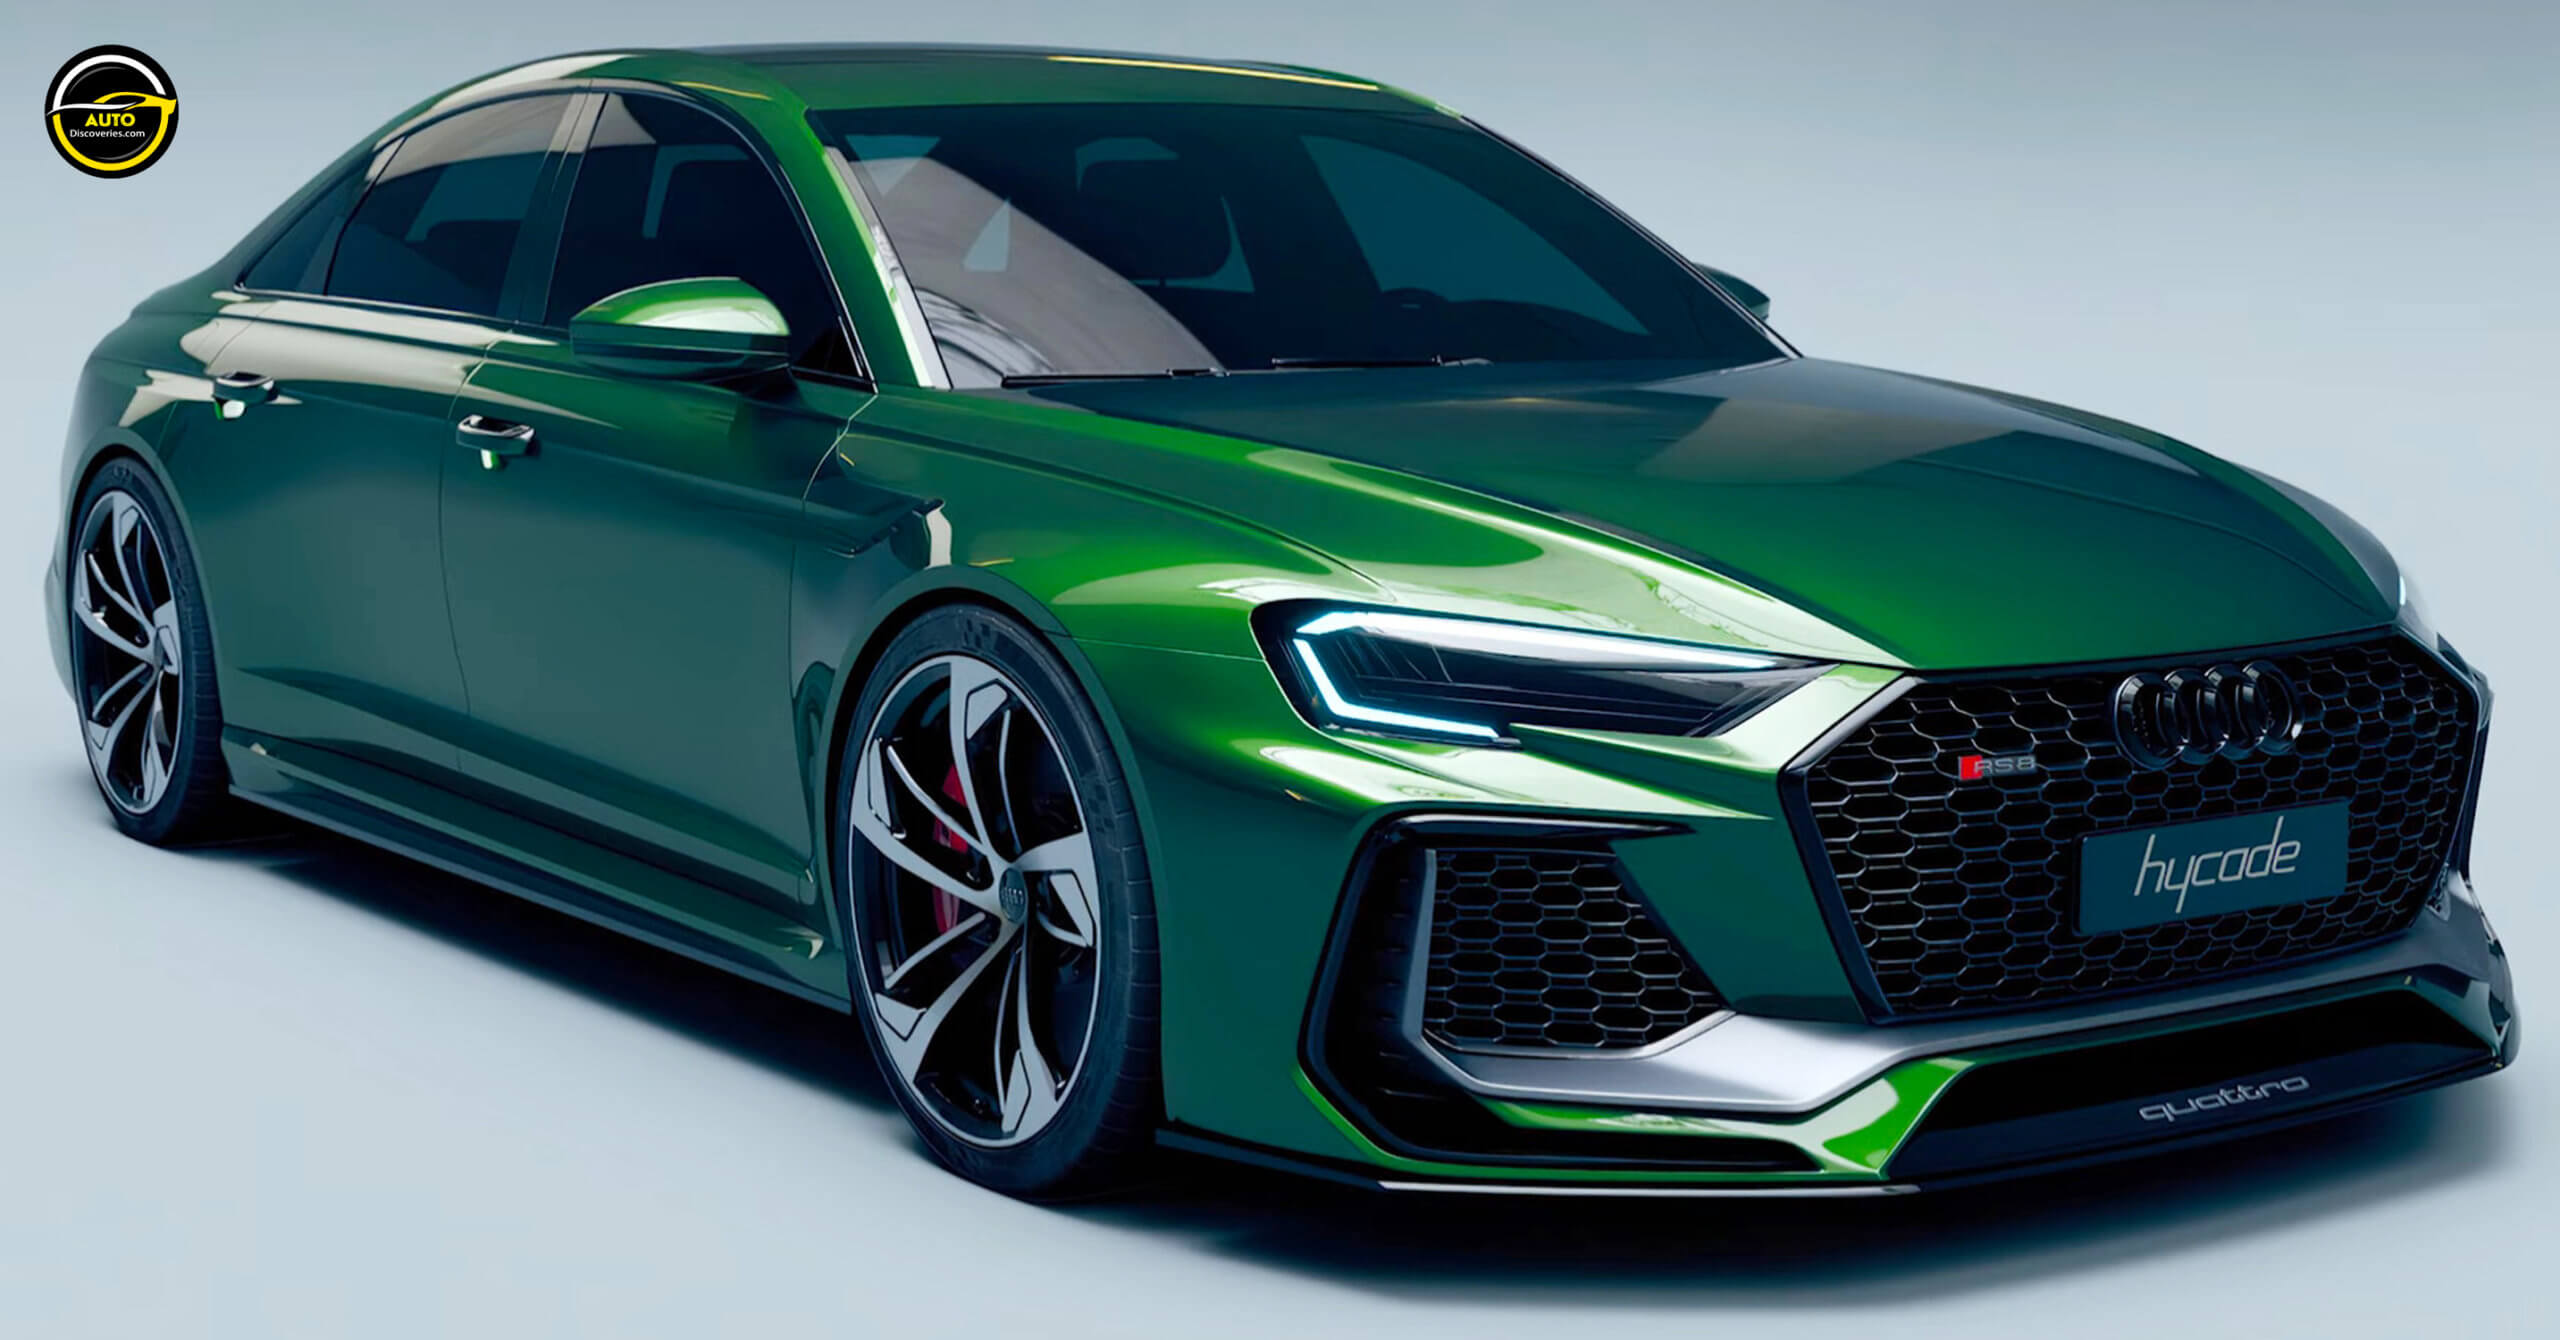 2022 Audi RS8 Ultra Widebody Is the Delicious CGI Dream Delivered by